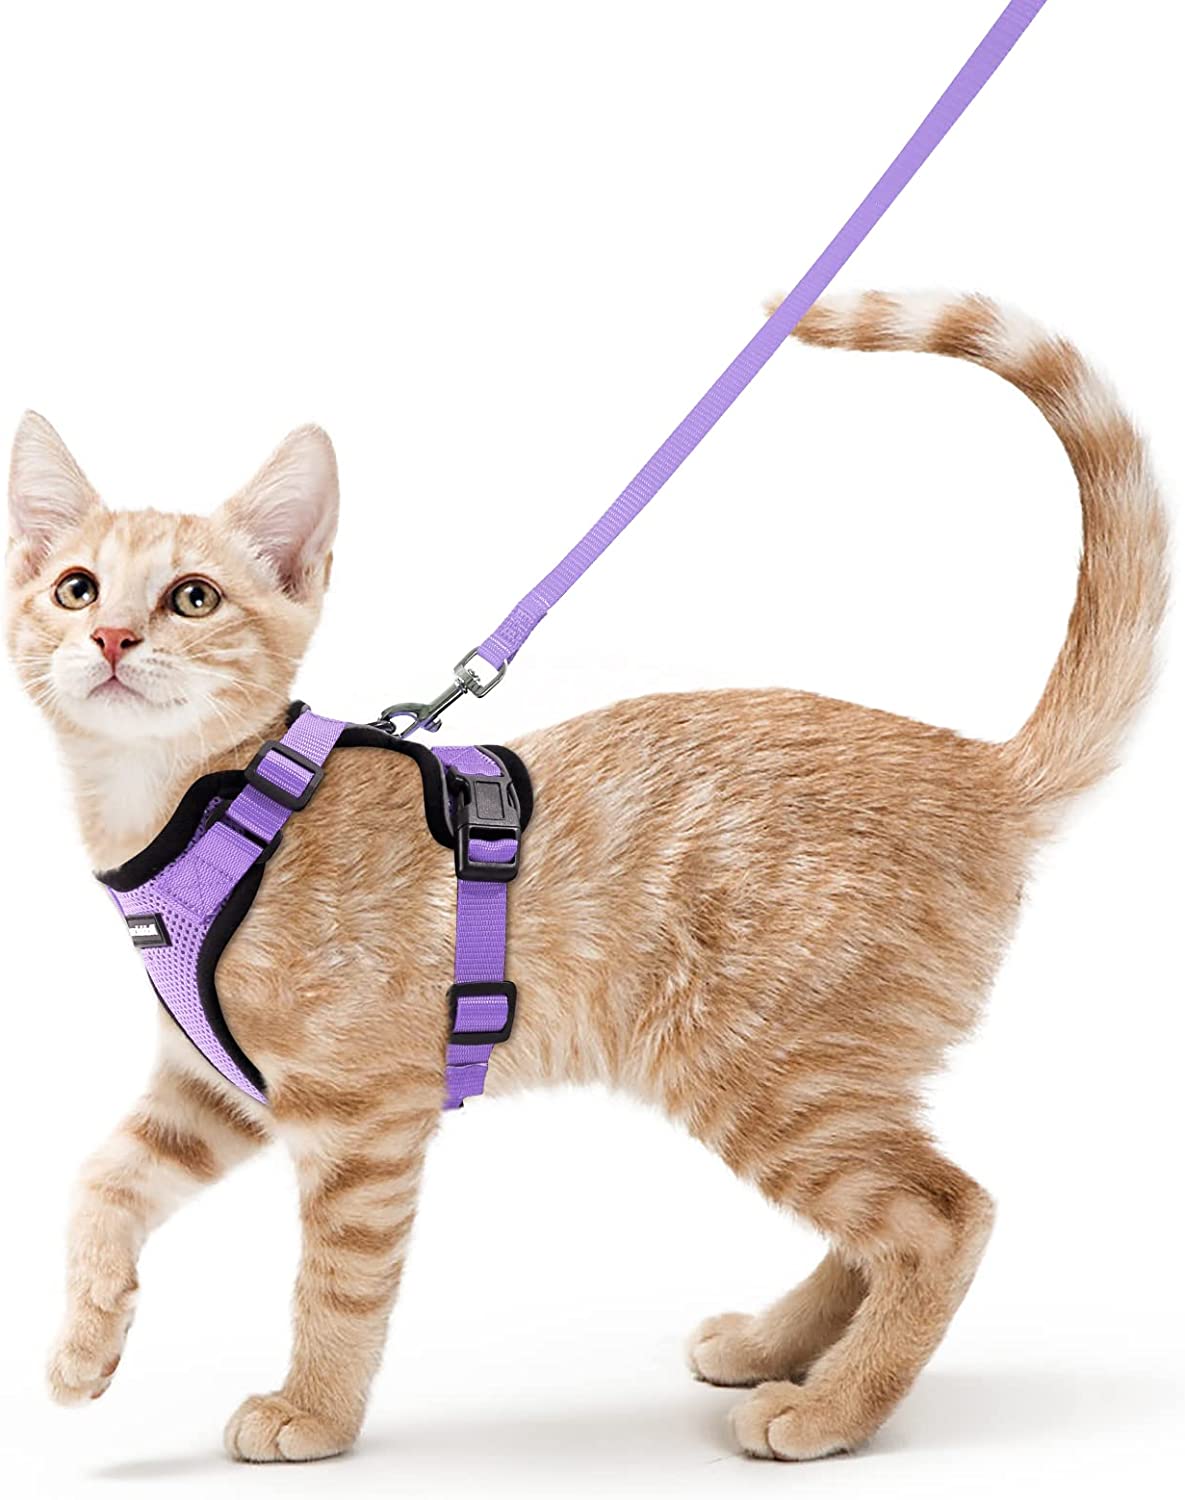 Cat Harness and Leash - Violet / XS - cat harness leash